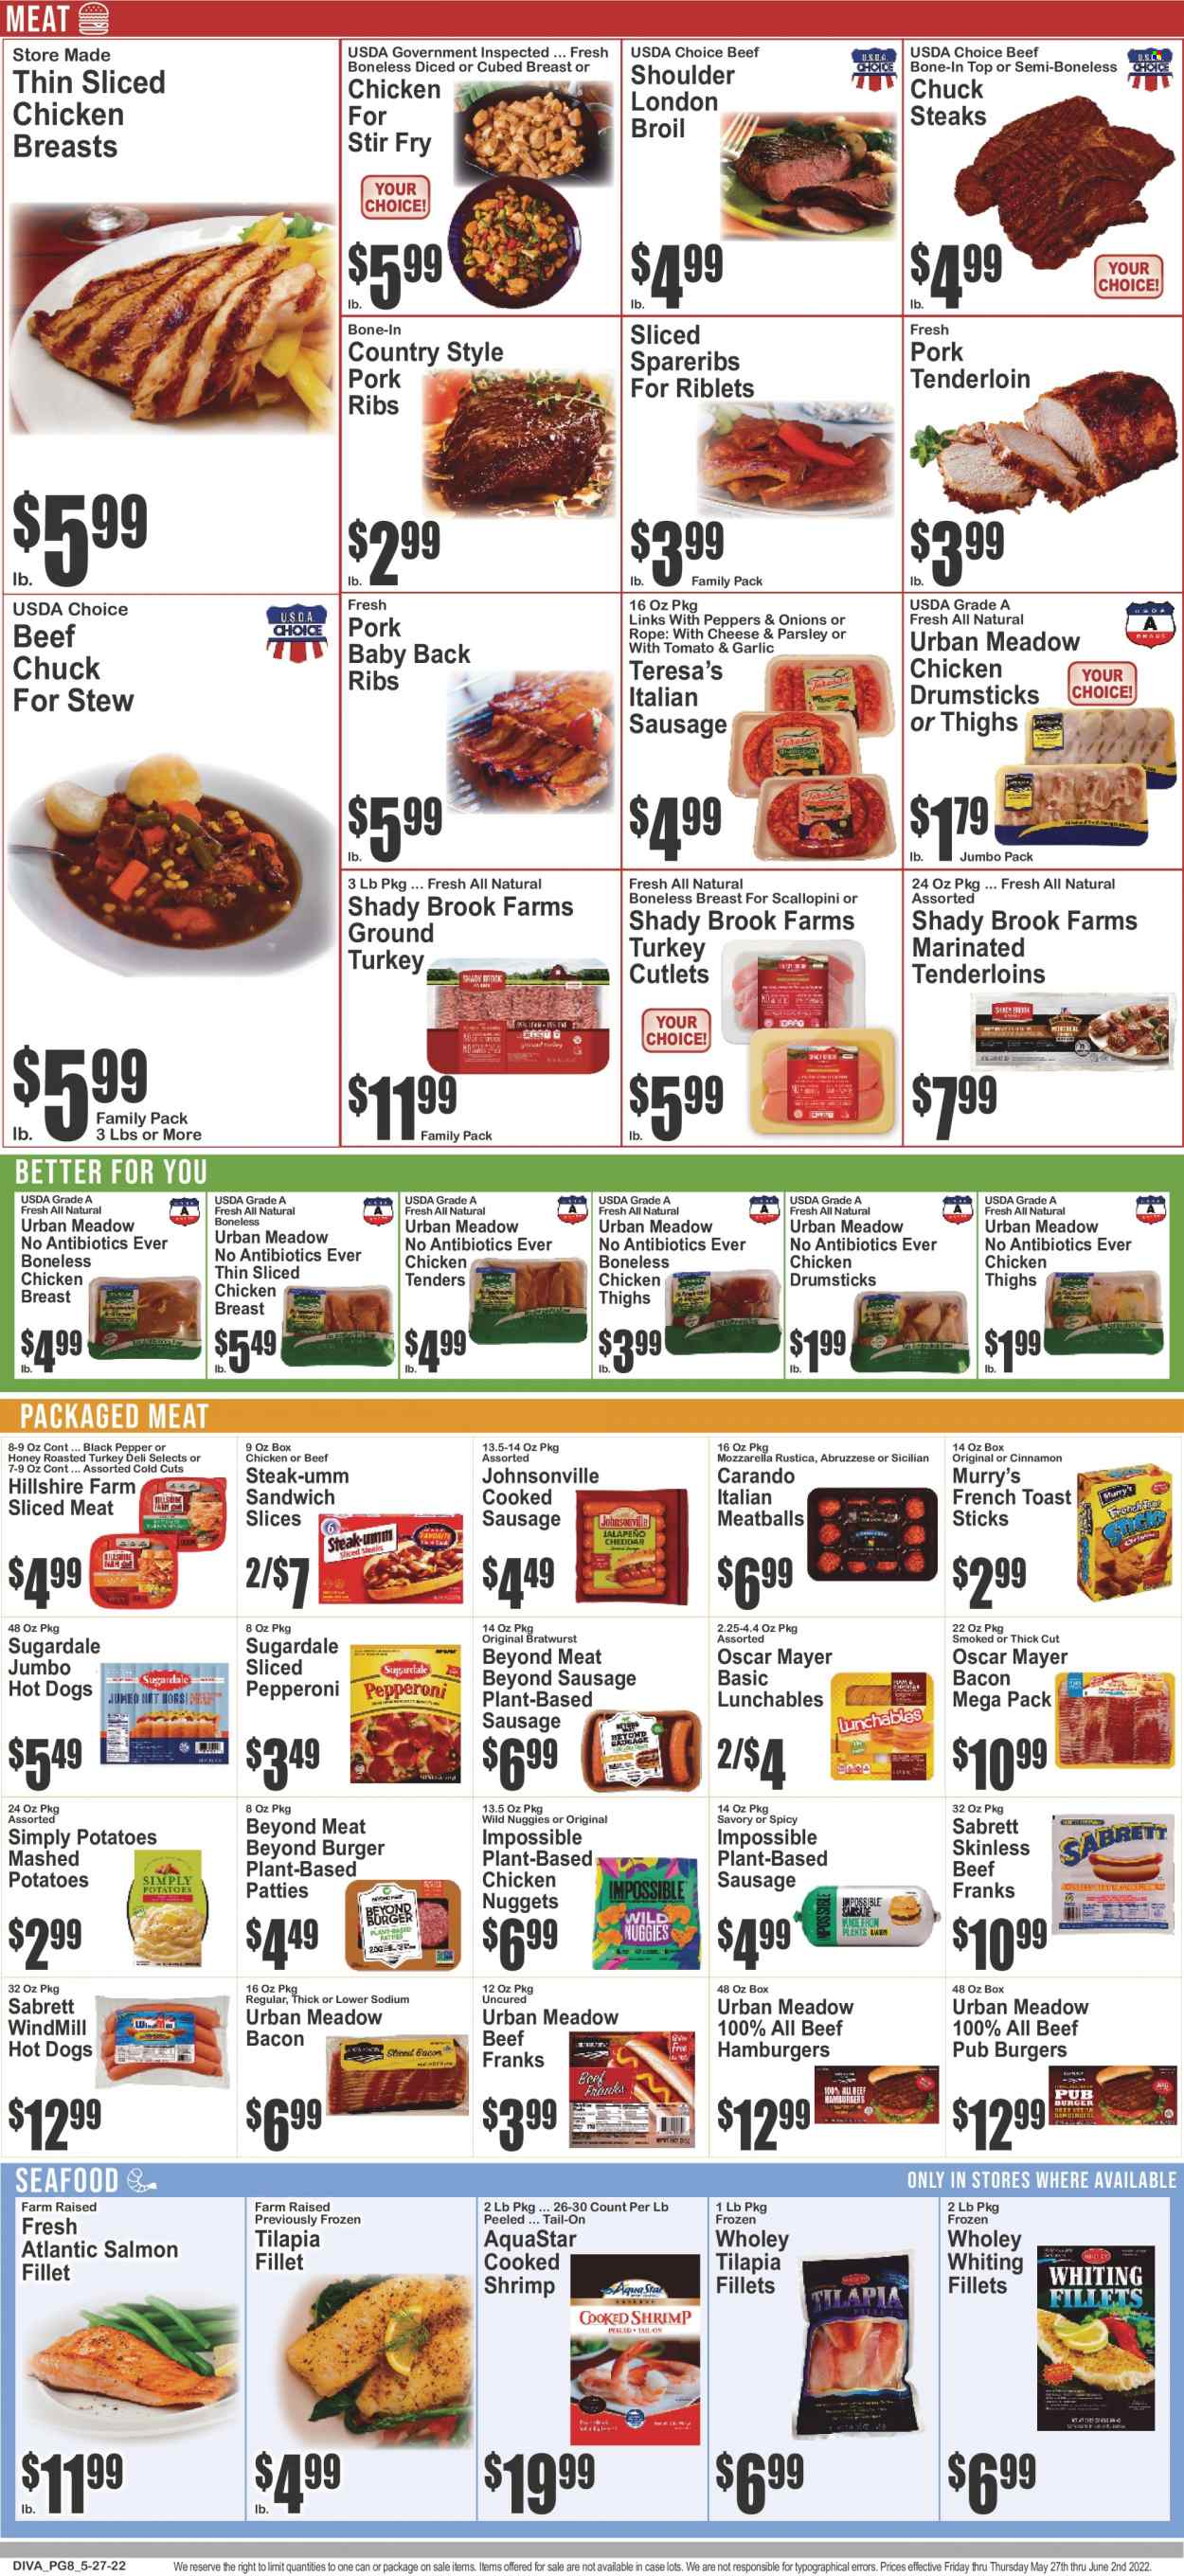 thumbnail - Key Food Flyer - 05/27/2022 - 06/02/2022 - Sales products - parsley, onion, salmon, salmon fillet, tilapia, seafood, shrimps, whiting fillets, whiting, mashed potatoes, hot dog, chicken tenders, meatballs, sandwich, nuggets, hamburger, chicken nuggets, Lunchables, Sugardale, bacon, Hillshire Farm, Johnsonville, Oscar Mayer, bratwurst, sausage, pepperoni, italian sausage, sandwich slices, black pepper, cinnamon, ground turkey, chicken breasts, chicken thighs, chicken drumsticks, beef meat, beef steak, steak, pork meat, pork ribs, pork tenderloin, pork spare ribs, pork back ribs, beef bone. Page 8.